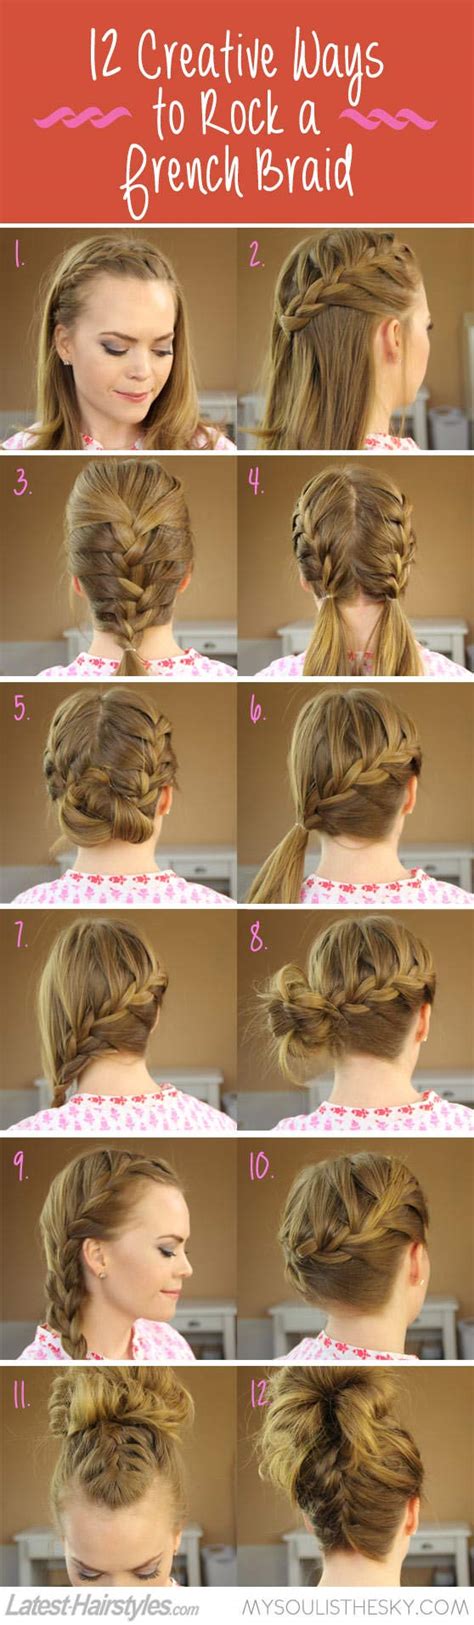 Simple easy braided updo hair via. 31+ braiding hair secrets - that just might change your life.